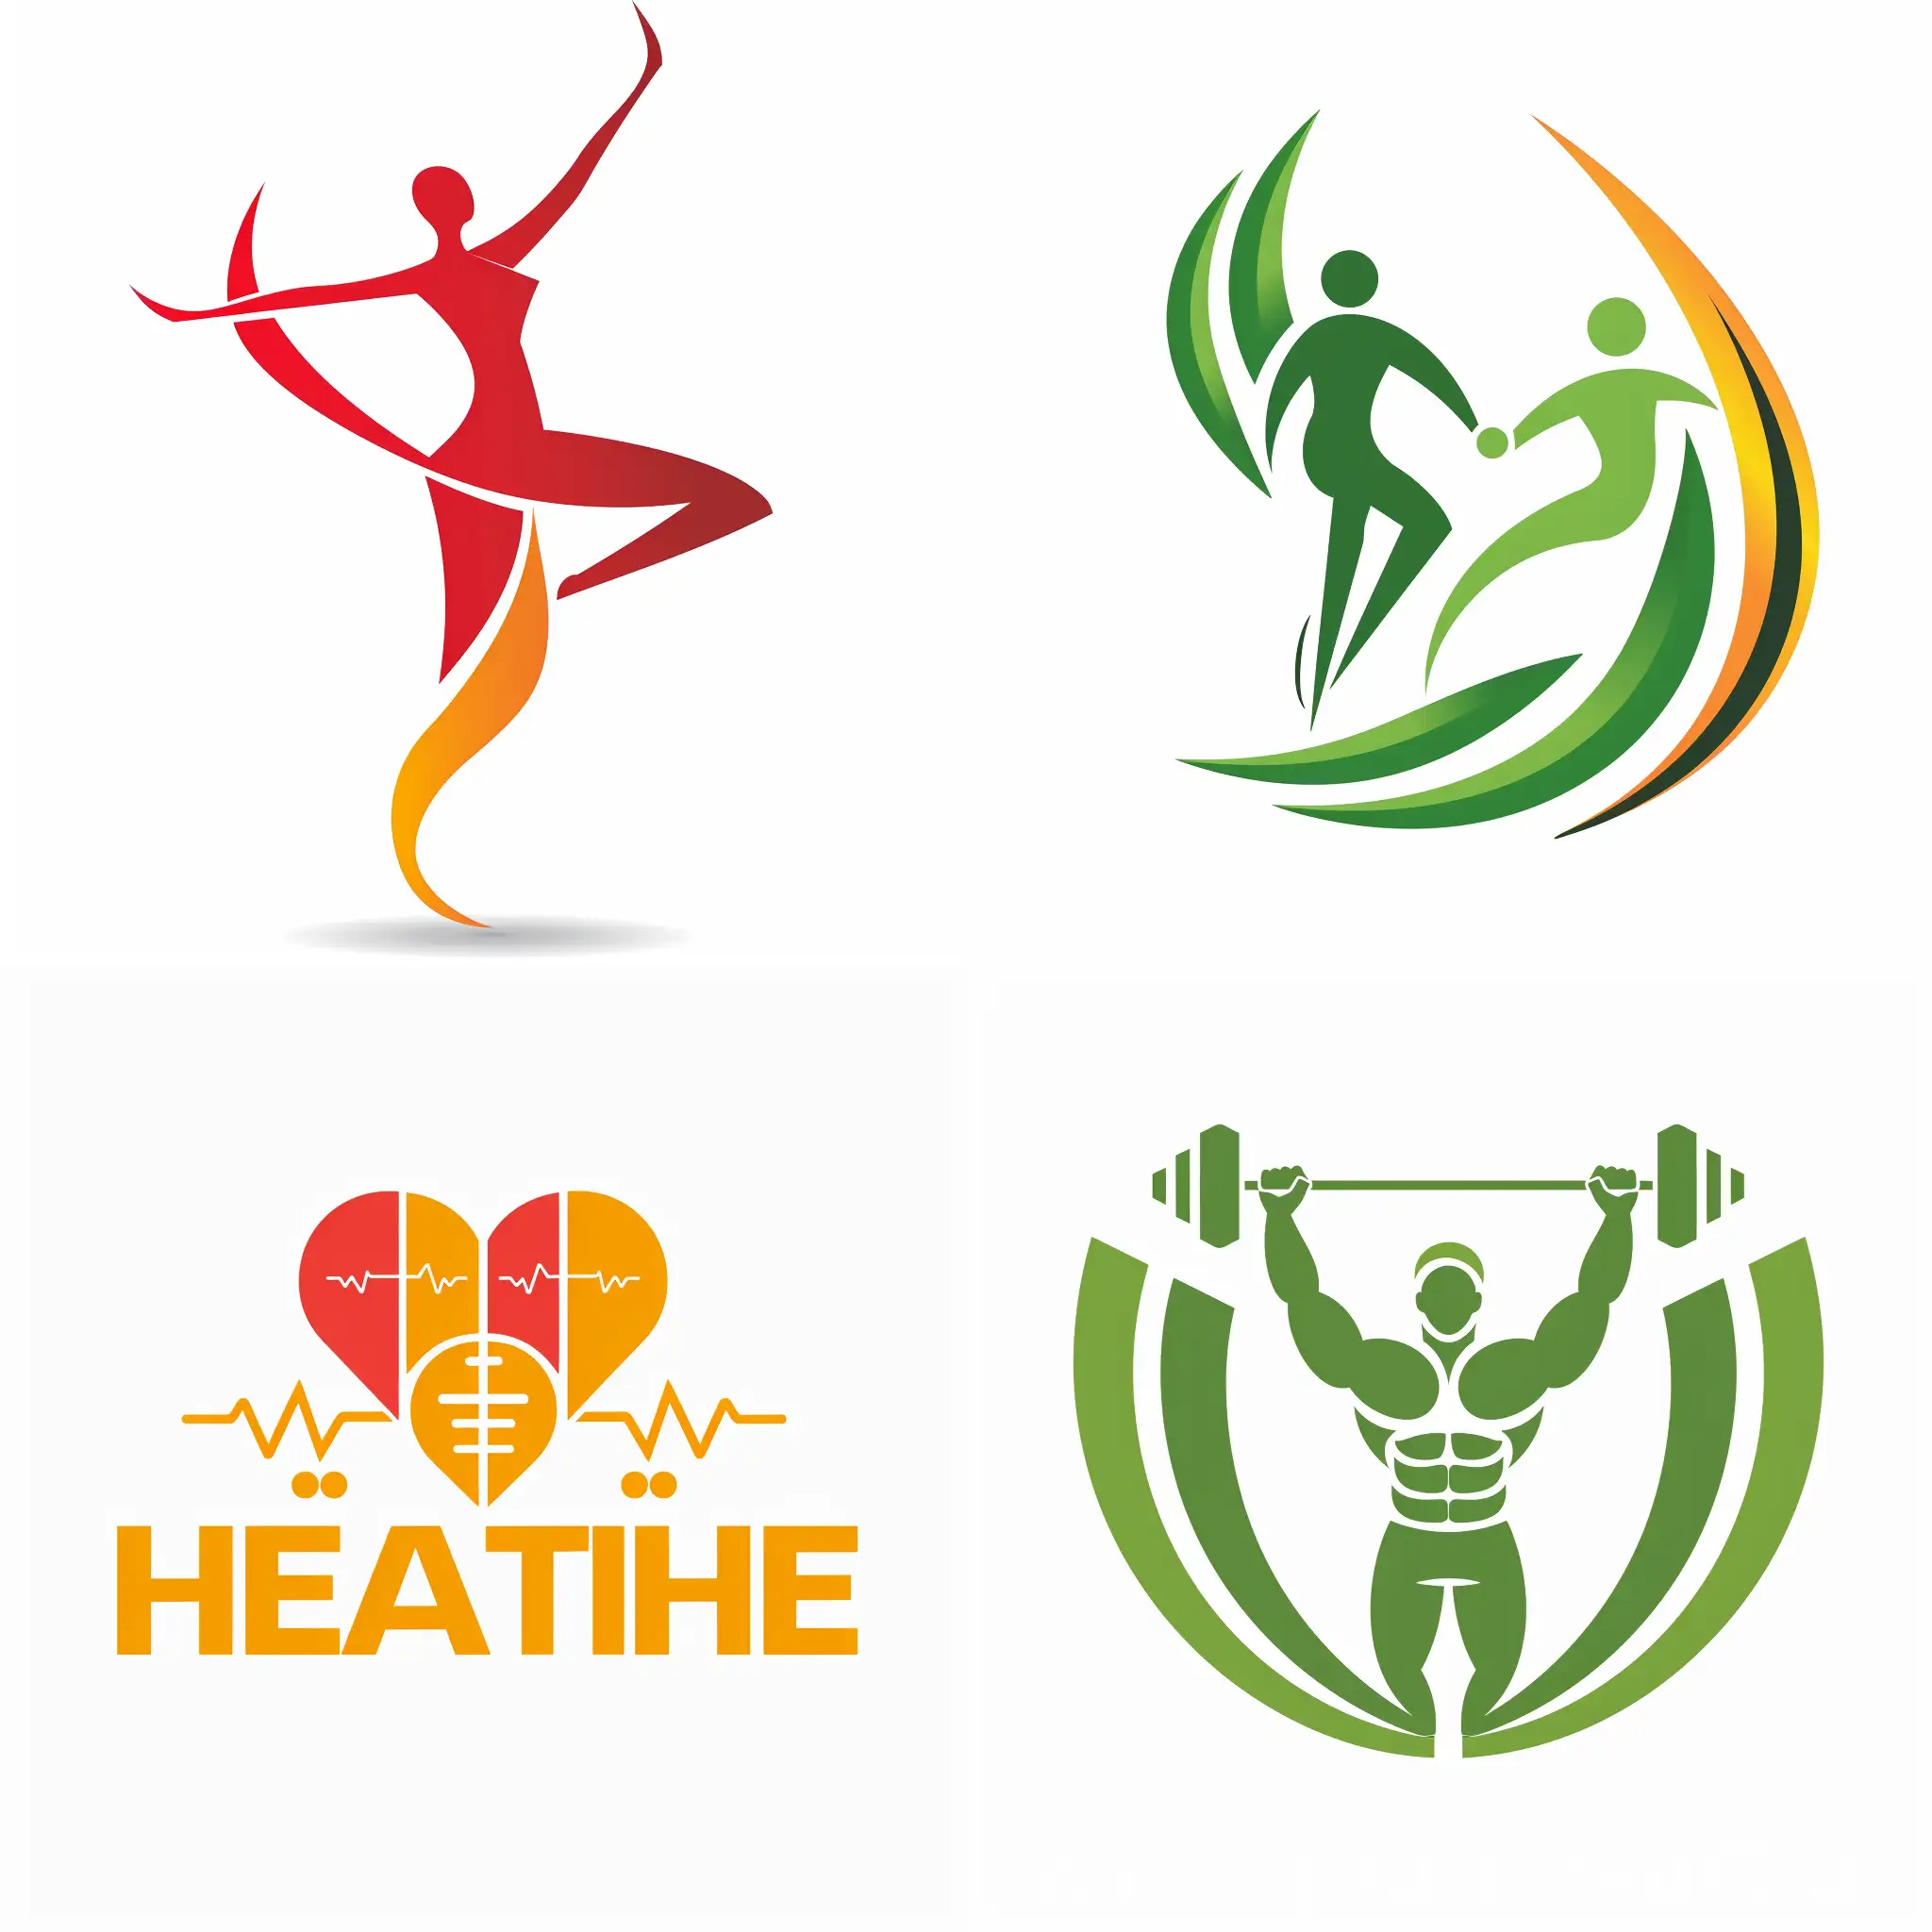 image of health and fitness logo